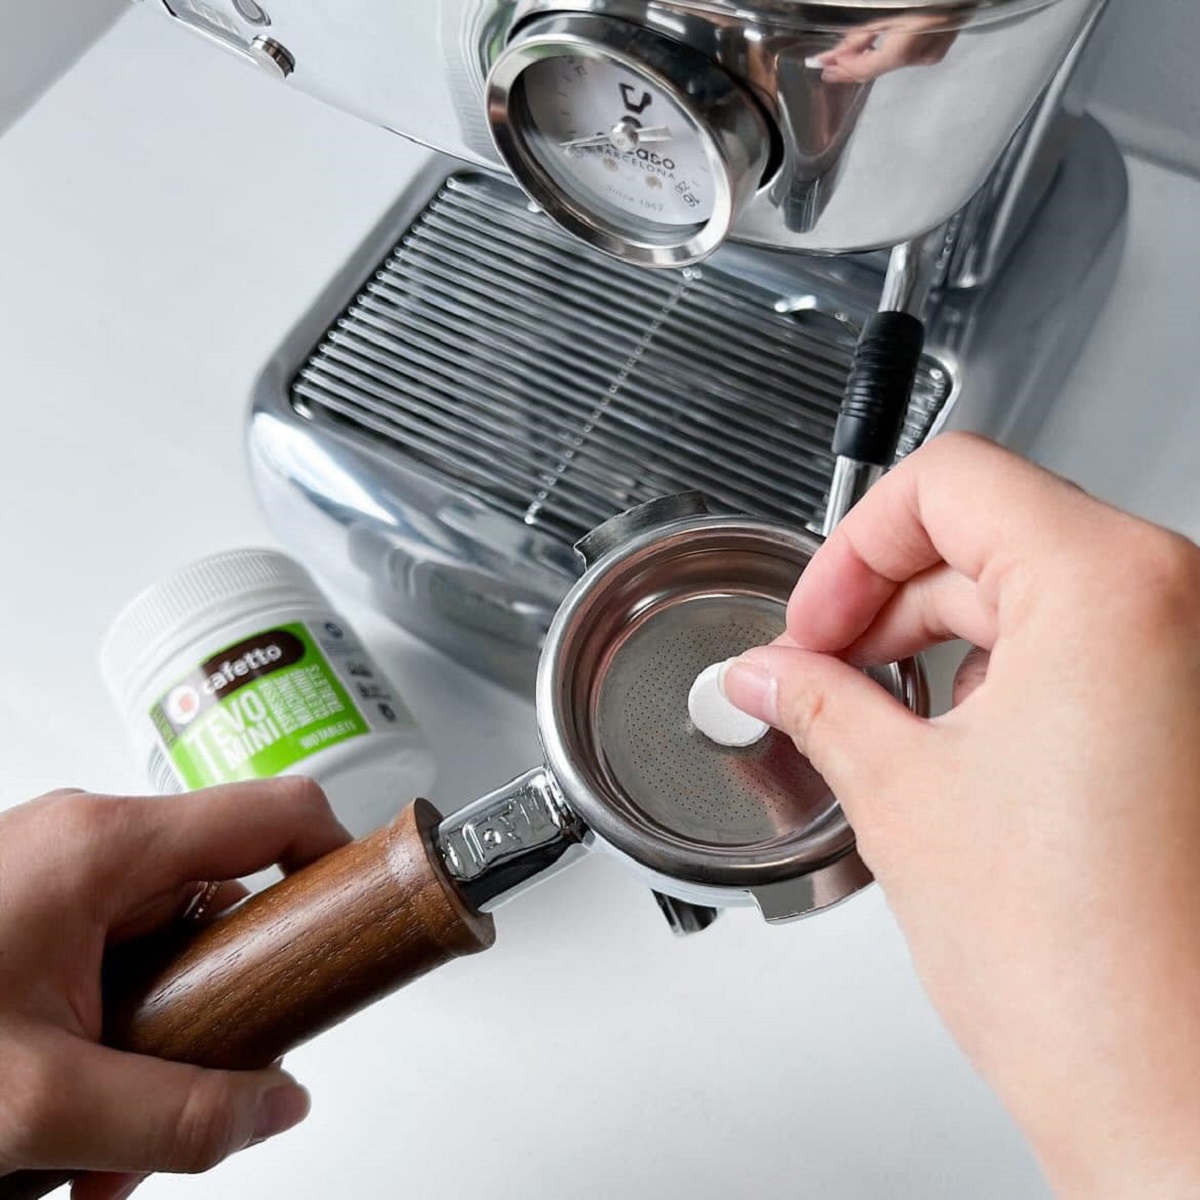 How To Use Espresso Machine Cleaning Tablets